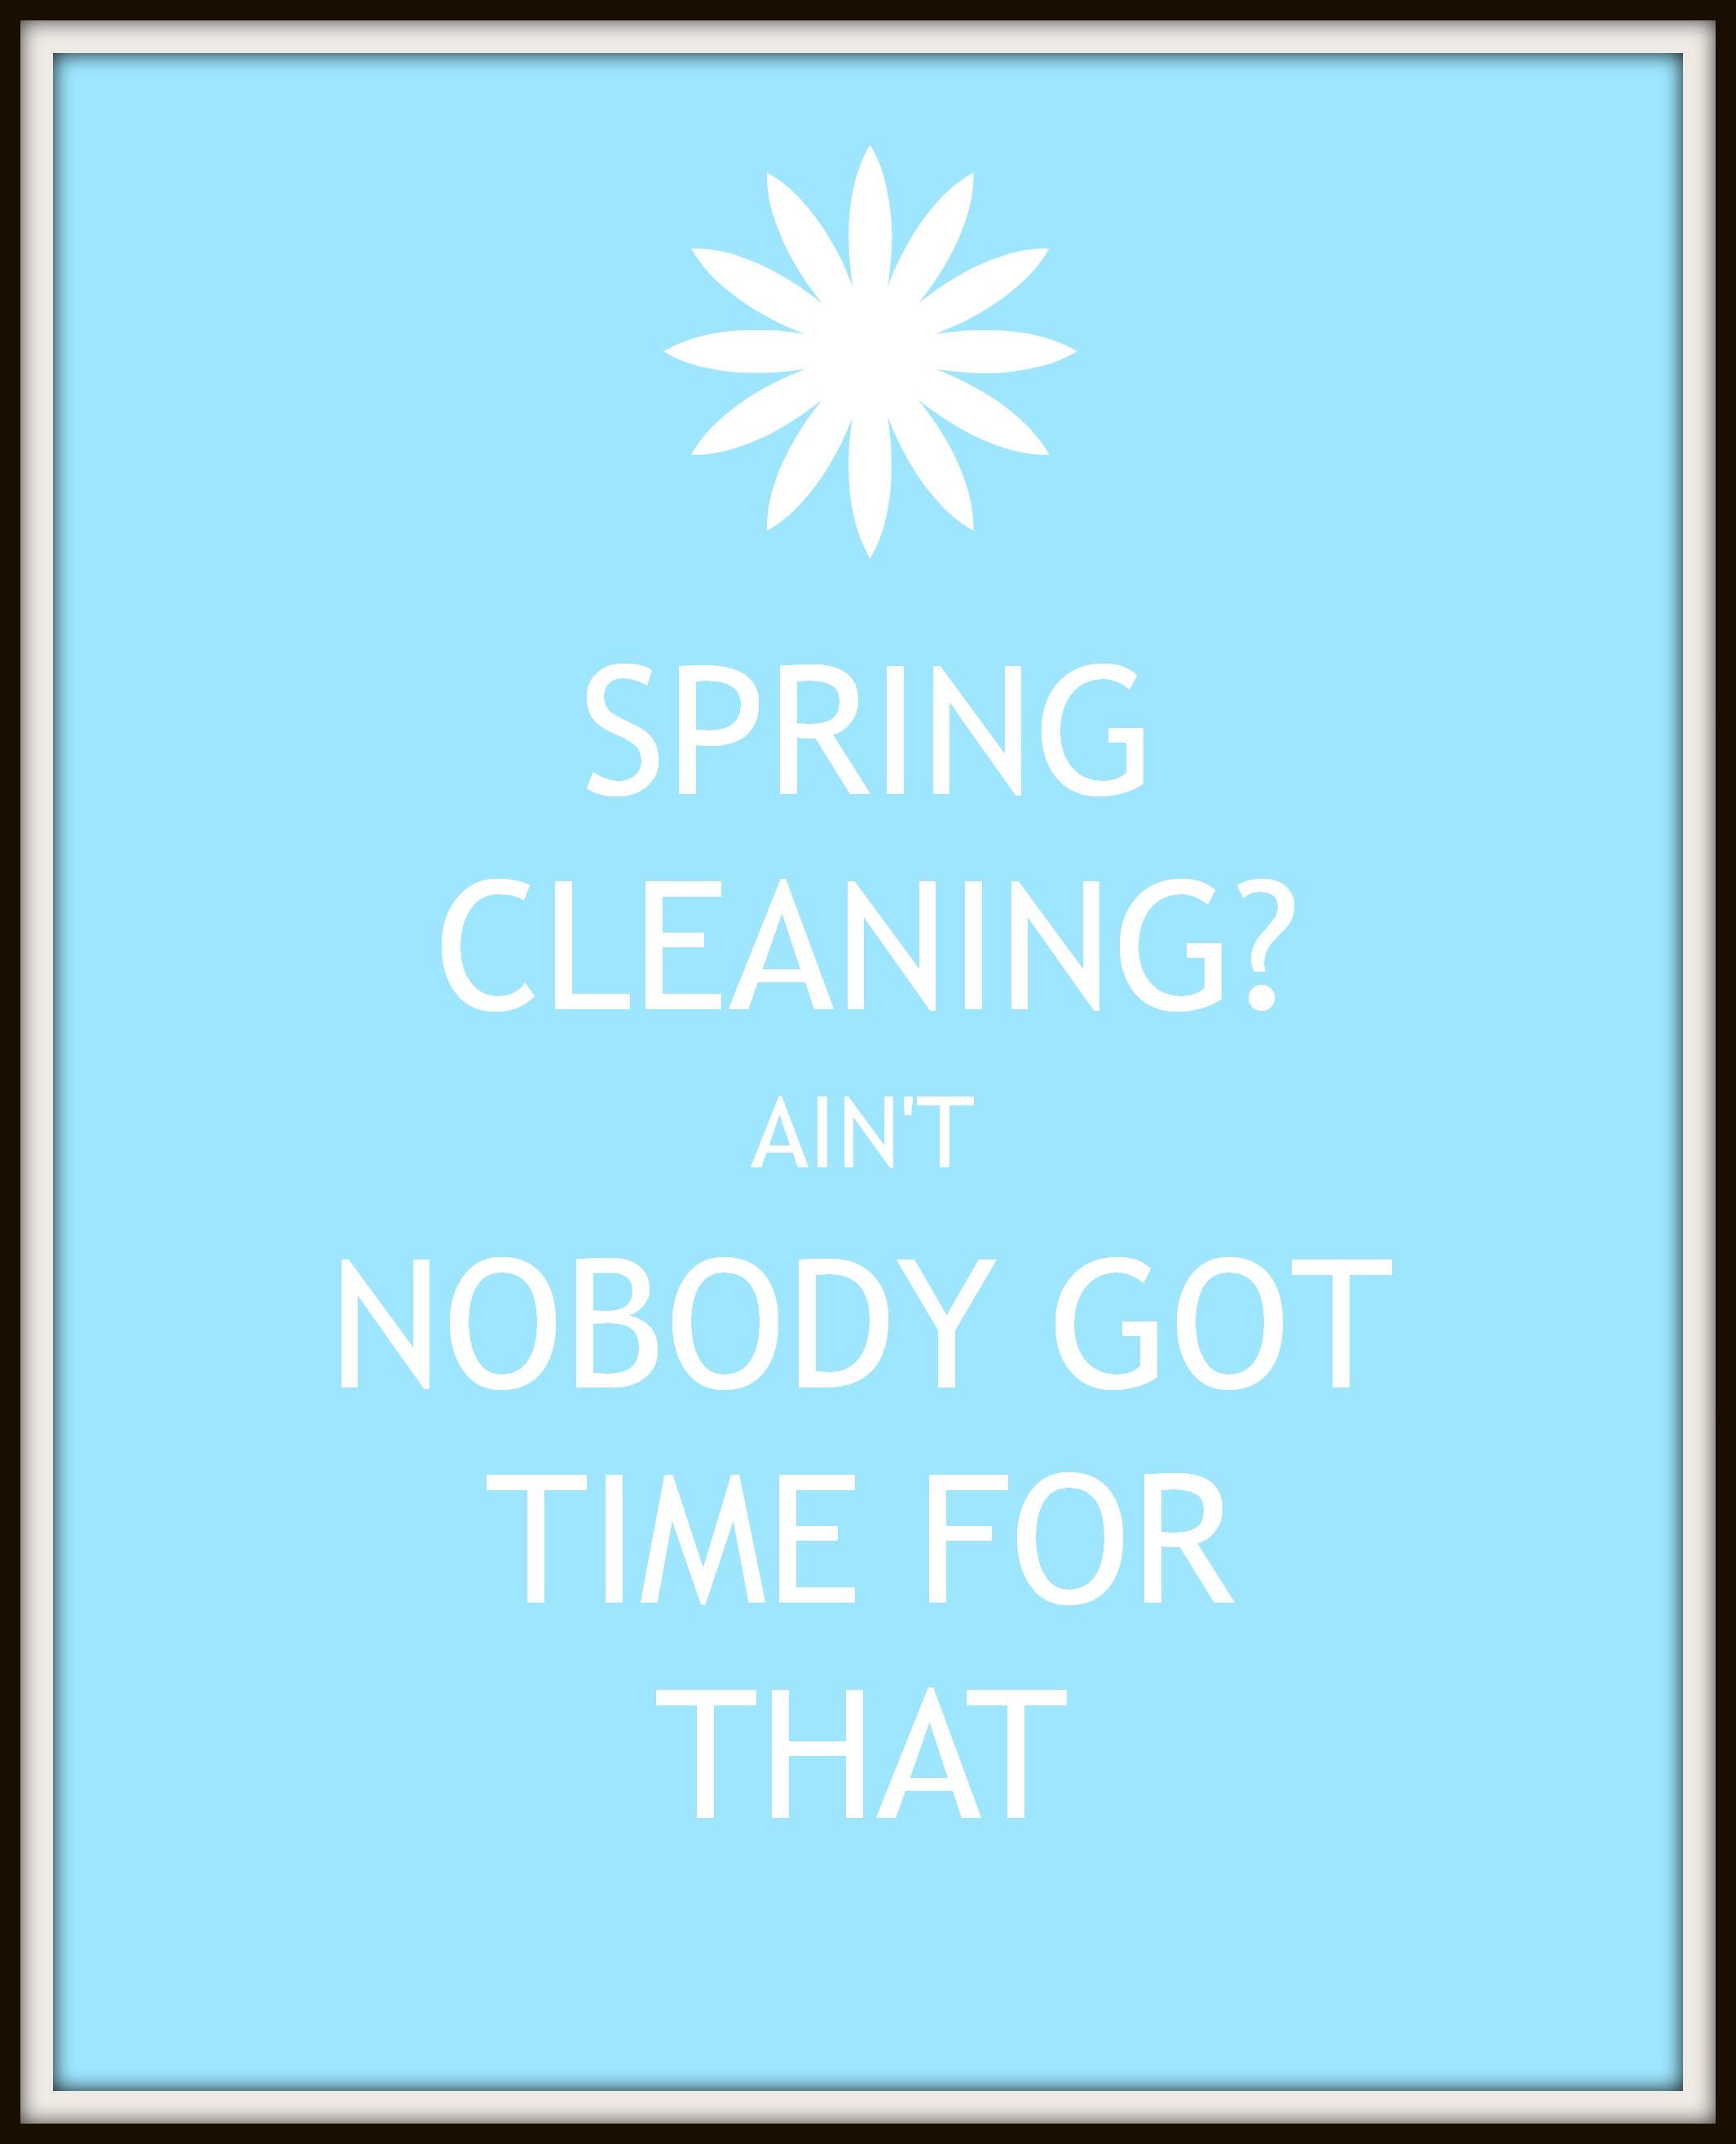 SpringCleaning